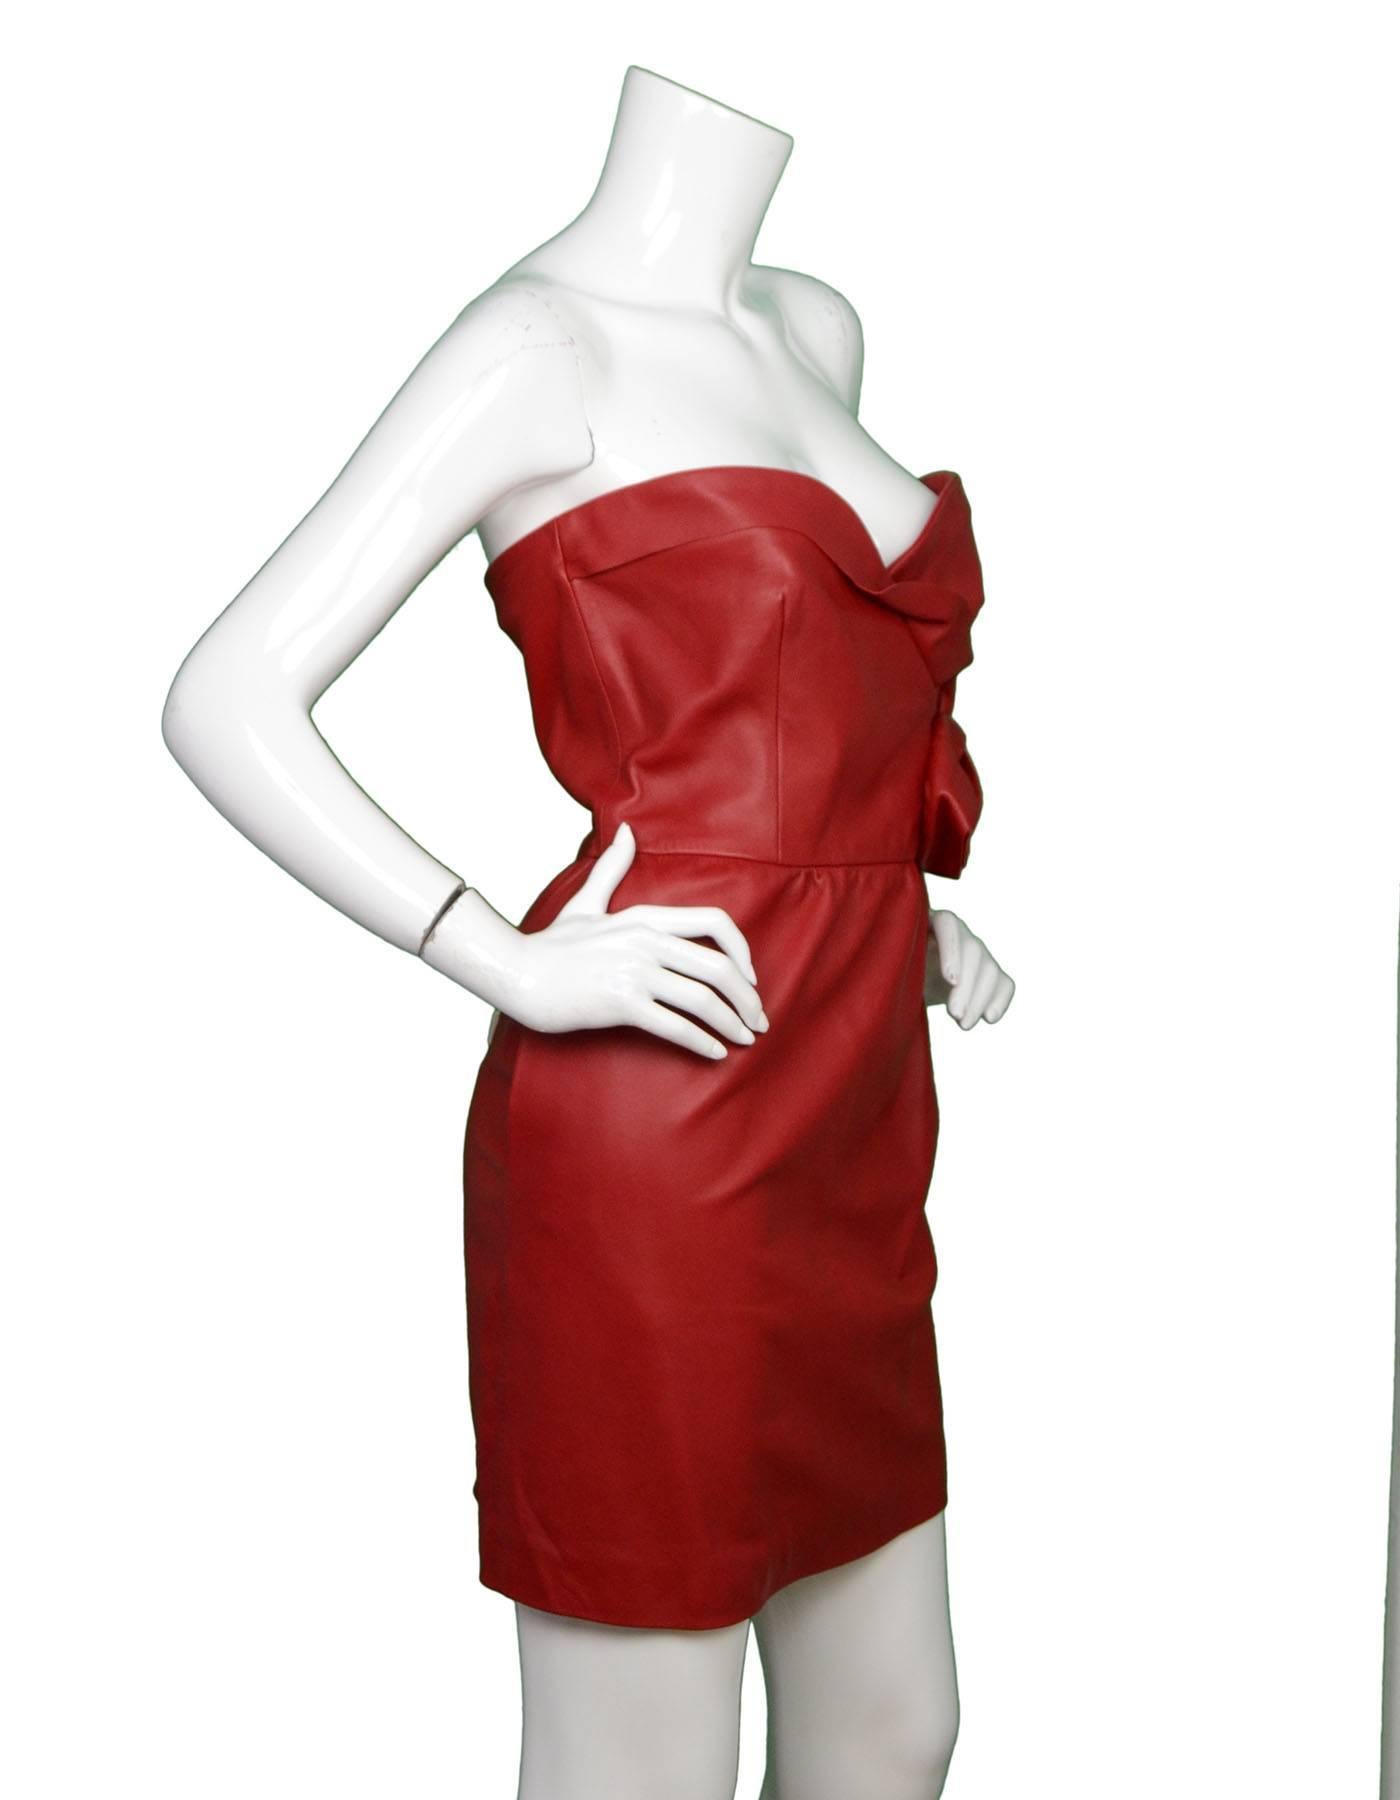 Valentino NWT Red Leather Strapless Dress 
Features red leather flower detail at waist
Made In: Italy
Color: Red
Composition: 100% lambskin
Lining: Nude, 100% silk
Closure/Opening: Side zipper
Exterior Pockets: Two hip pockets
Interior